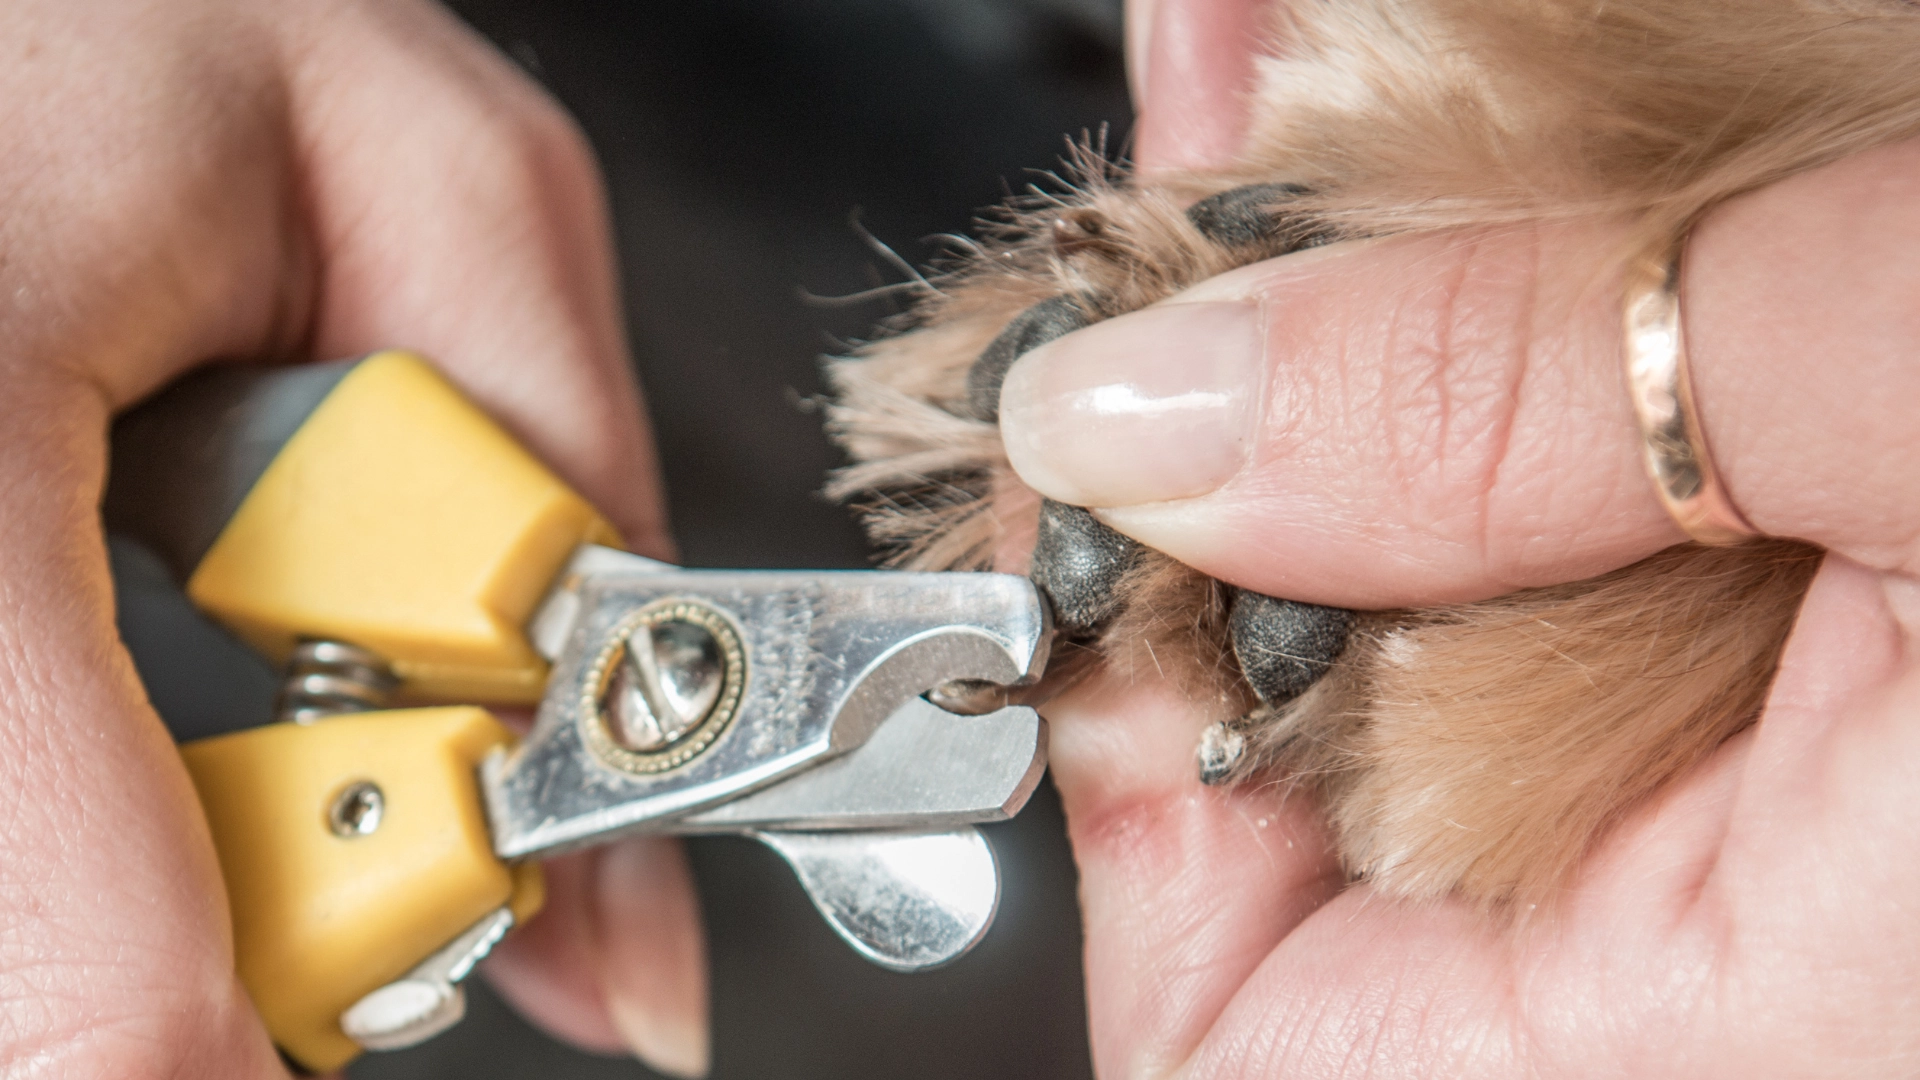 How to Cut Puppy Nails Painlessly – Safest Techniques